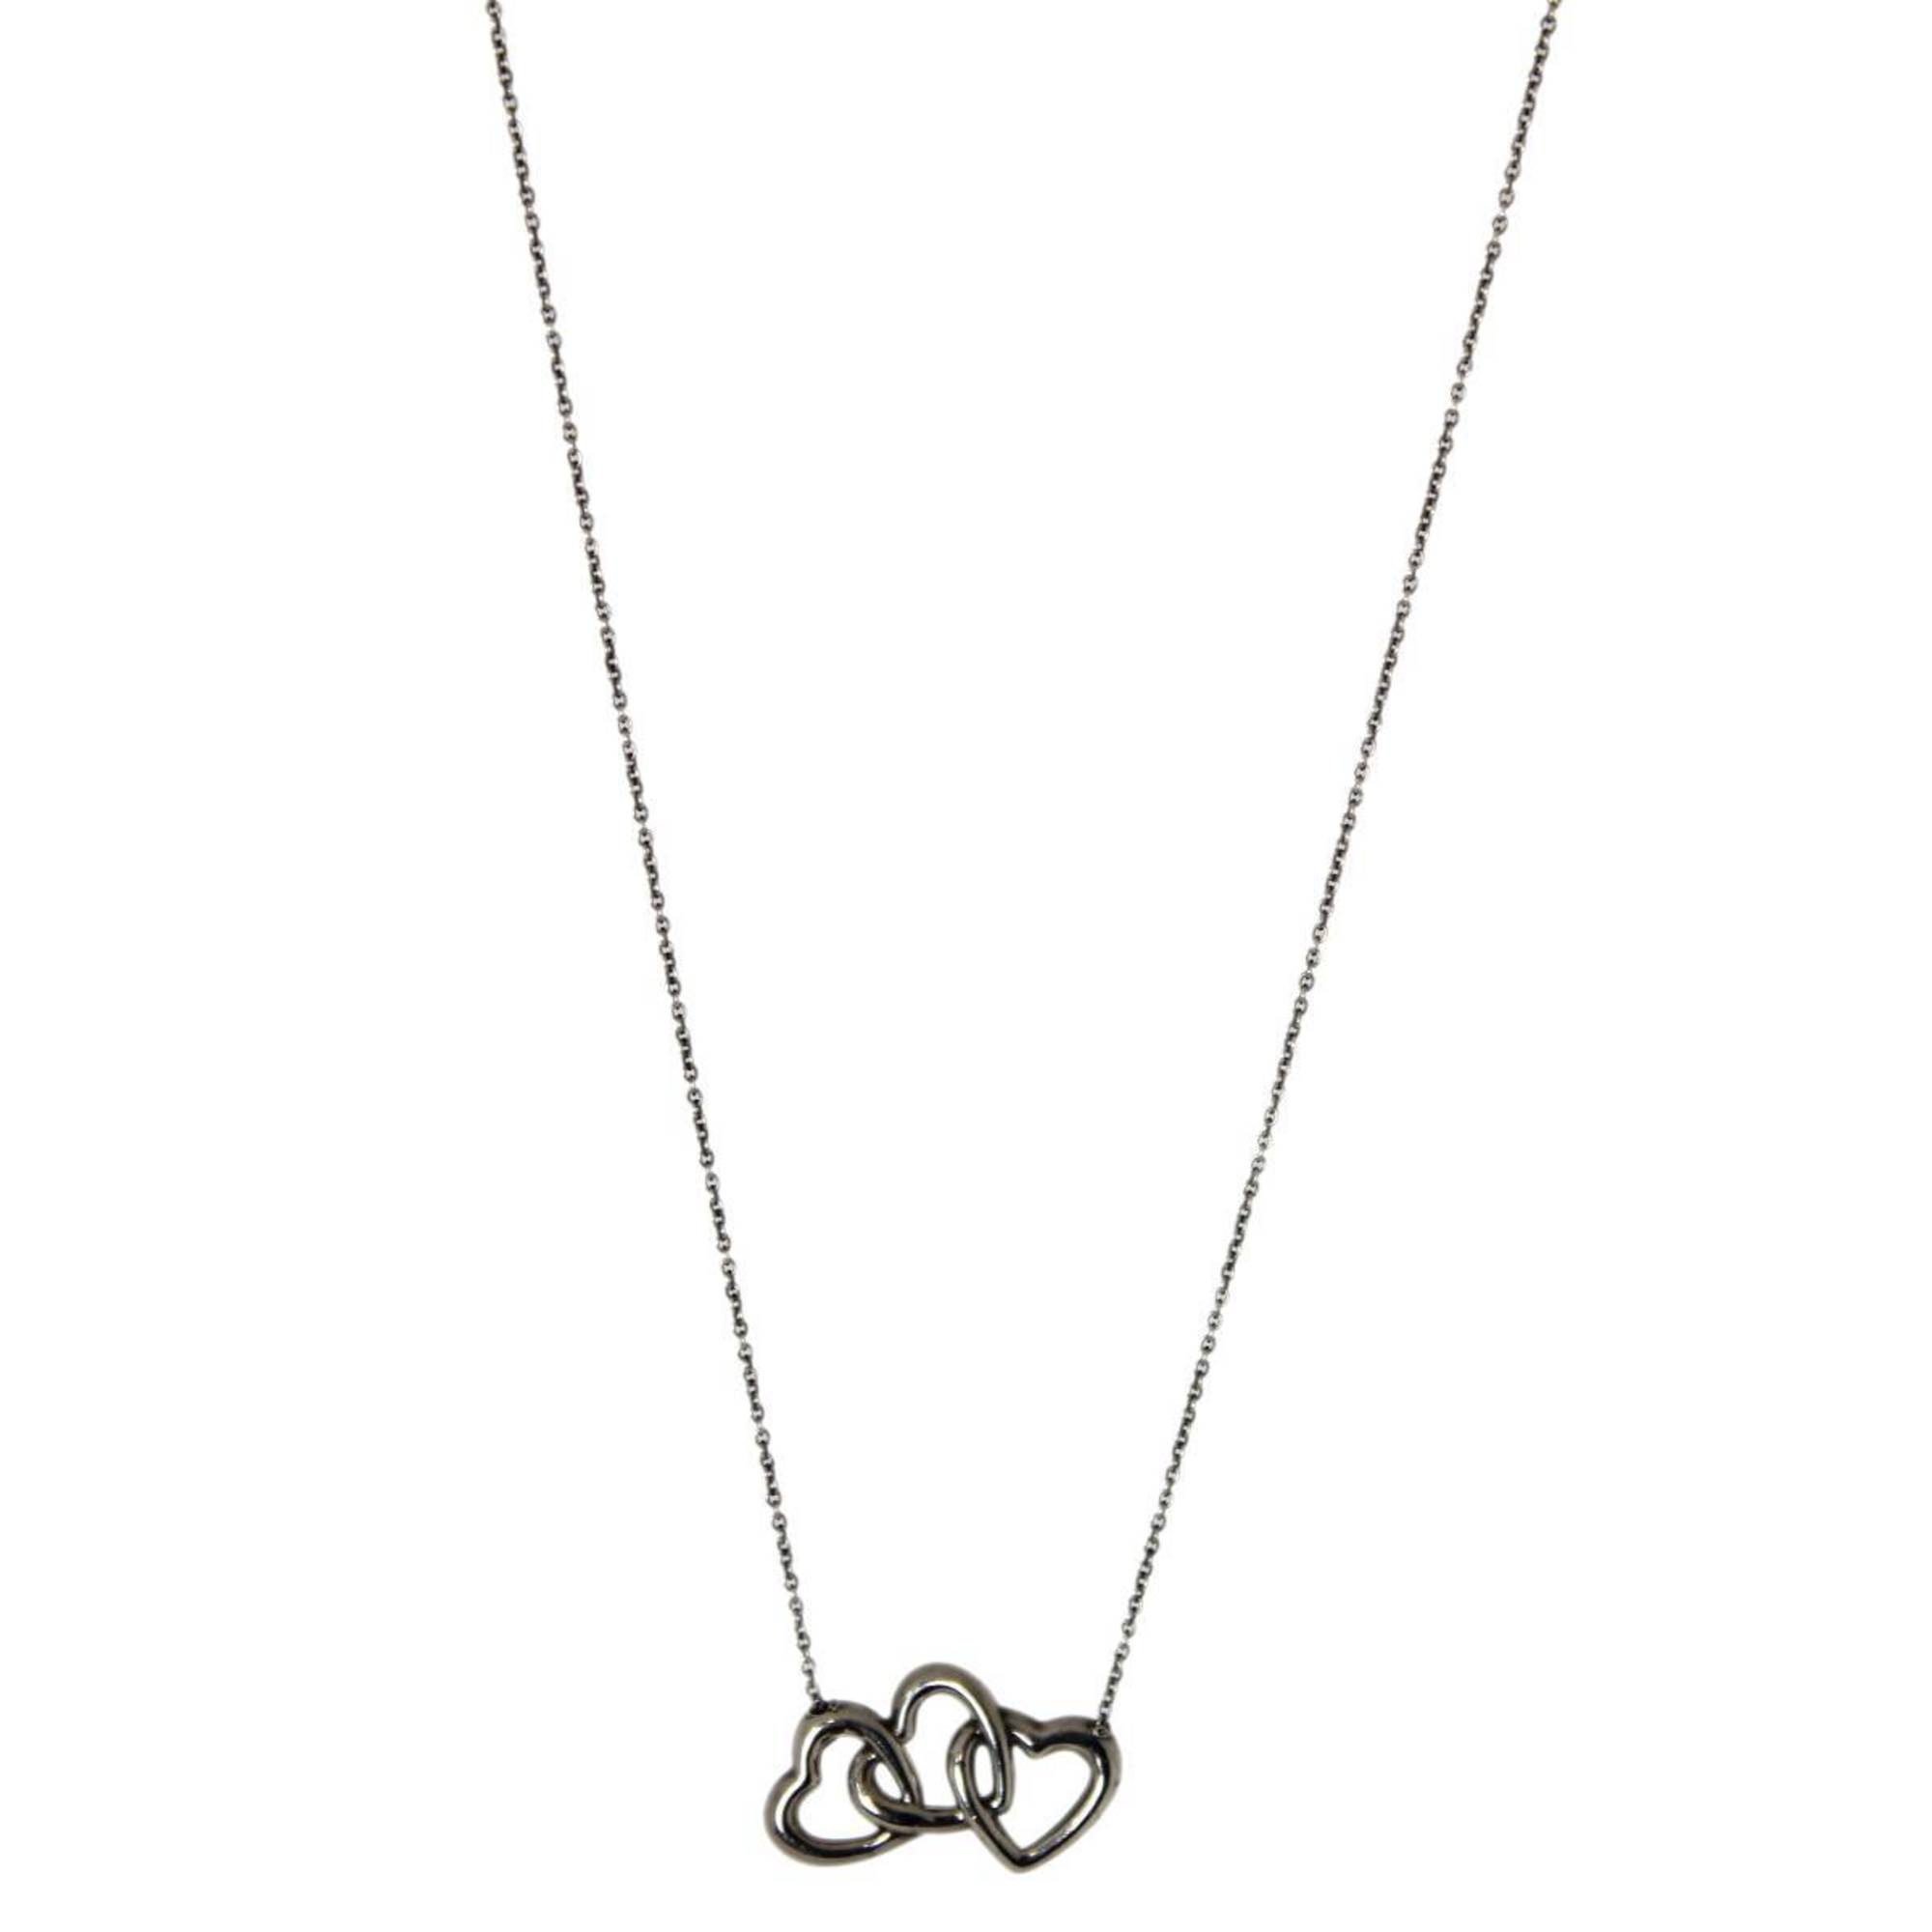 Tiffany & Co. Chain Necklace Heart Motif Sv925 Approx. 41cm